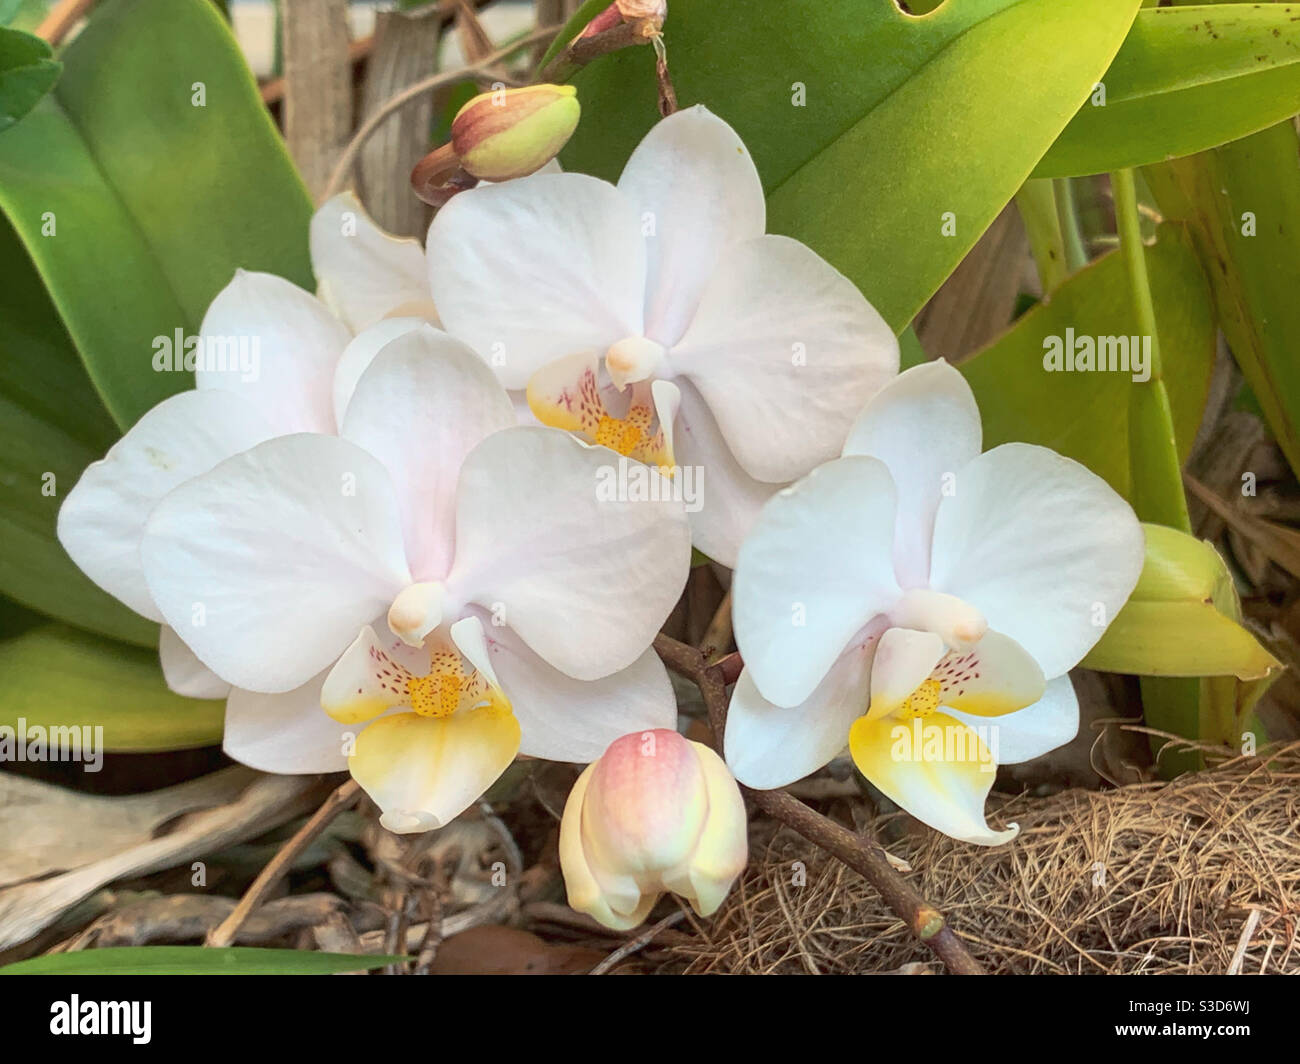 Flower Closeup on some beautiful white Moth Orchids flowers in the garden, Australia Stock Photo